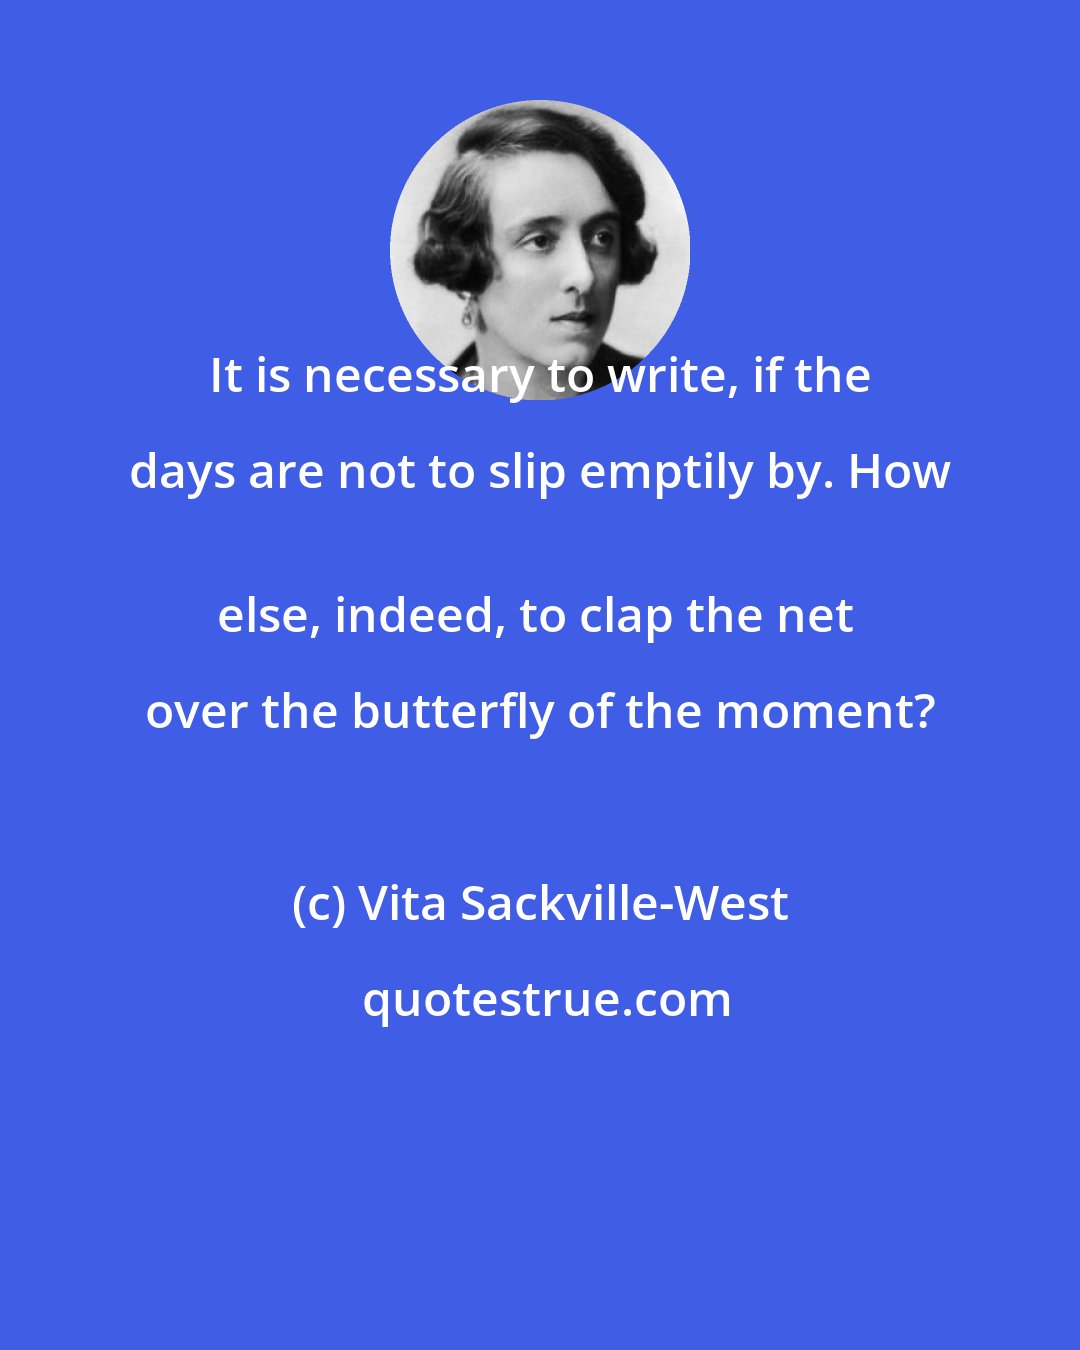 Vita Sackville-West: It is necessary to write, if the days are not to slip emptily by. How 
else, indeed, to clap the net over the butterfly of the moment?